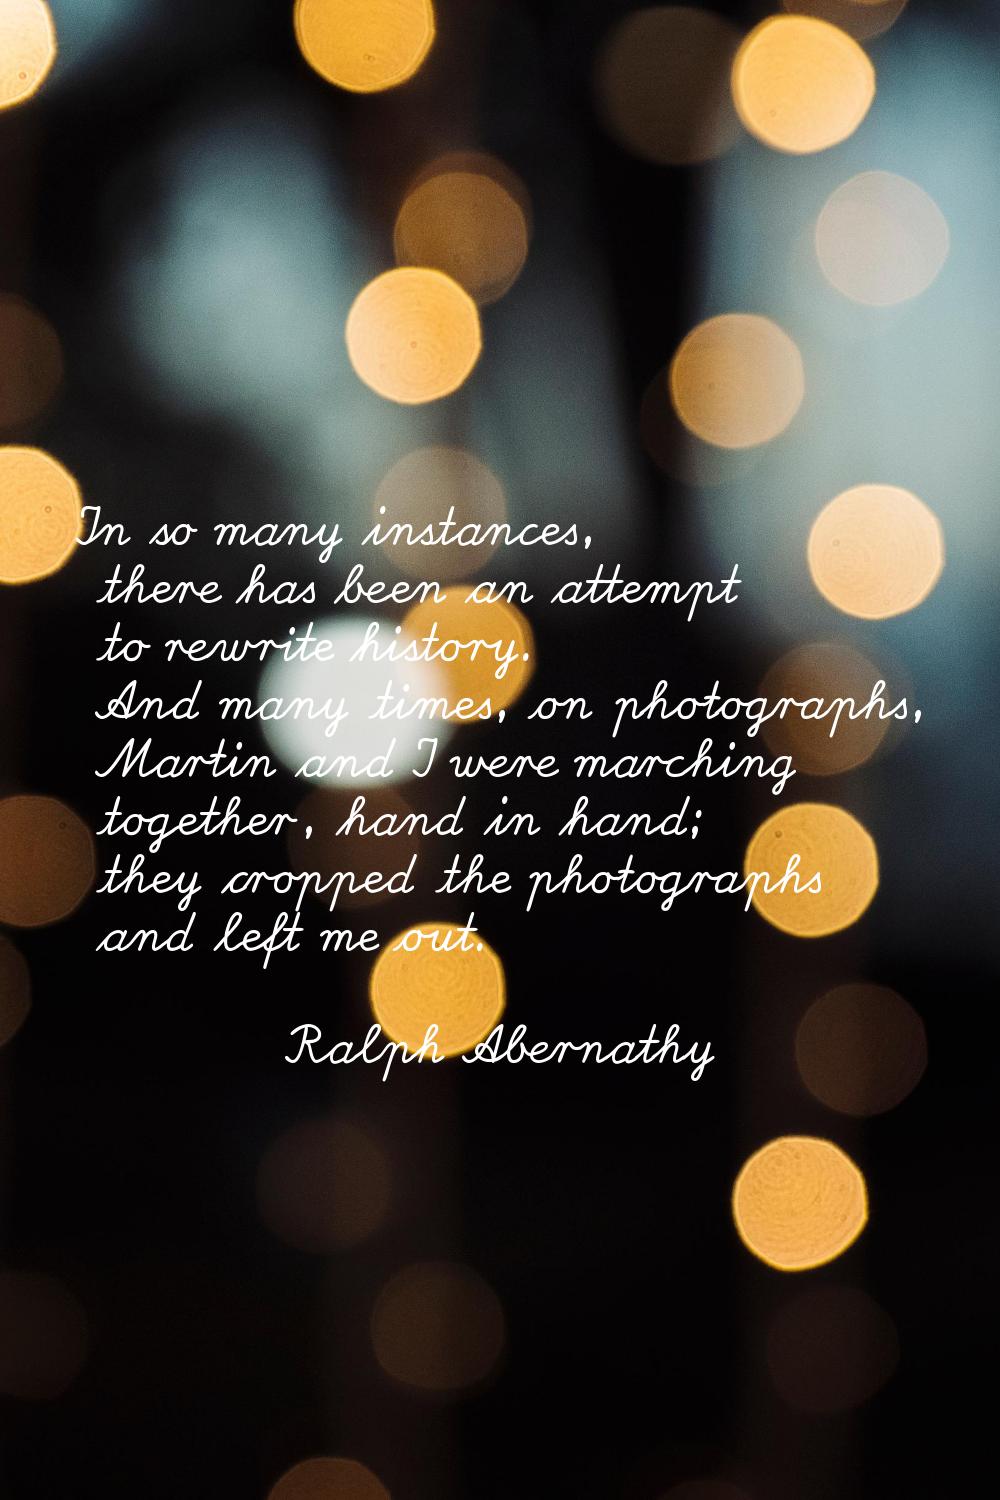 In so many instances, there has been an attempt to rewrite history. And many times, on photographs,